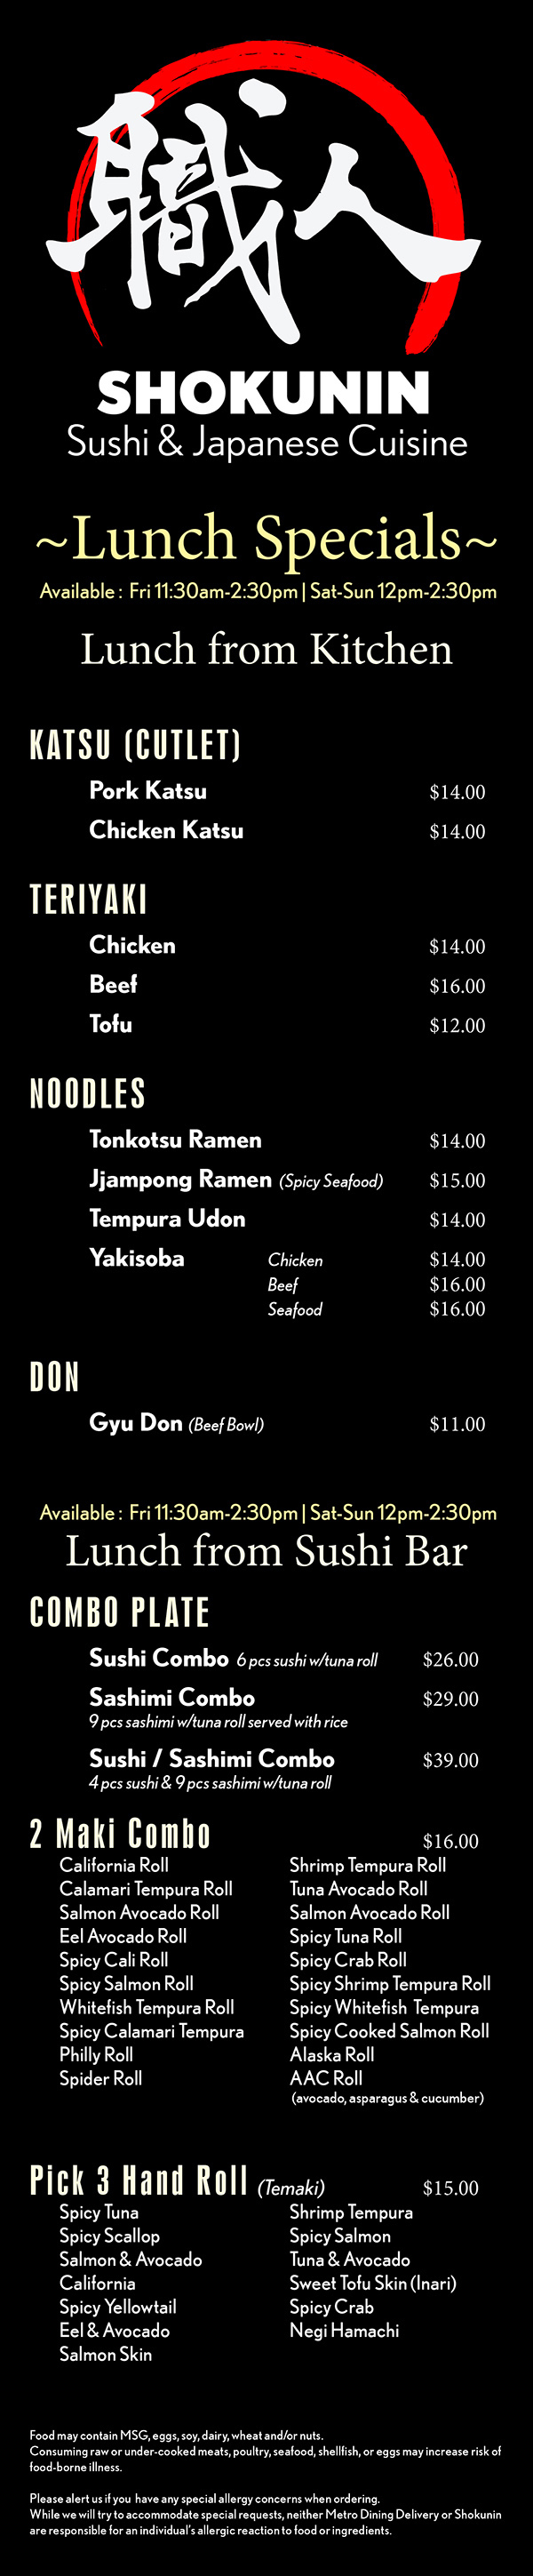 

~Lunch Special Menu~
Lunch from Kitchen
TERIYAKI
Chicken 					$11 
Shrimp /Scallop				$15
Salmon						$13
Tofu							$11


DONBURI Japanese Rice Bowls
Oyako Don					$11
Pork Katsu Don				$11
Chicken Katdu Don			$11
Beef Don					$12
Spicy Pork Don				$11
Spicy Sashimi Don			$16
Tofu Don					$10


KATSU
Pork						$12
Chicken						$12


NOODLES
Donkotsu Ramen			$11
Spicy Seafood Ramen		$13
Tempura Udon				$11
Yakisoba	Chicken			$11
			Beef		  		$13
			Seafood	  		$15


CHEF’S SELECTION DISH
Galbi   Grilled beef short ribs		$18
Soy Garlic Chicken 		  	$12
Soy Garlic Shrimp			$14
Spicy Soy Garlic Chicken	$12
Spicy Soy Garlic Shrimp		$14

Lunch from Sushi Bar
Served with soup or salad.
Sushi Combo  6 pcs sushi w/tuna roll	$16
Sashimi Combo  
   9 pcs sashimi w/tuna roll served with rice	$18
Sushi / Sashimi Combo  
  4 pcs sushi & 9 pcs sashimi w/tuna roll	$24
2 Maki Combo			$12
	Tuna Roll	Shrimp Tempura Roll
	Salmon Roll	Salmon Avocado Roll	
	California Roll	Tuna Avocado Roll
	Philly Roll	Alaska Roll	
	Avocado Roll	Cucumber Roll			Spicy Crab Roll	Spicy Salmon Roll
	Spicy Yellowtail Roll	Spicy Tuna Roll
	A.A.C. (avocado, asparagus & cucumber)
Special Rolls			$10
	Tiger	Shrimp Albacore
	Got Red	Tuna Lover
	Shrimp Lover	Salmon Lover
	Rainbow	Dragon
	Tuna Poke	Salmon Poke	
Pick 3 Hand Roll			$11
	Spicy Tuna	Spicy Salmon
	Spicy Scallop	Spicy Crab
	Eel & Avocado	Shrimp Tempura
	Salmon & Avocado	Tuna & Avocado
	California	Negi Hamachi
	Shrimp & Avocado	Vegetable
	Sweet Tofu Skin (Inari)	Spicy Yellowtail
	Salmon Skin
 

Food may contain MSG, eggs, soy, dairy, wheat and/or nuts.
Consuming raw or under-cooked meats, poultry, seafood, shellfish, or eggs may increase risk of food-borne illness.

Please alert us if you  have any special allergy concerns when ordering.
While we will try to accommodate special requests, neither Metro Dining Delivery or Shokunin are responsible for an individual’s allergic reaction to food or ingredients.